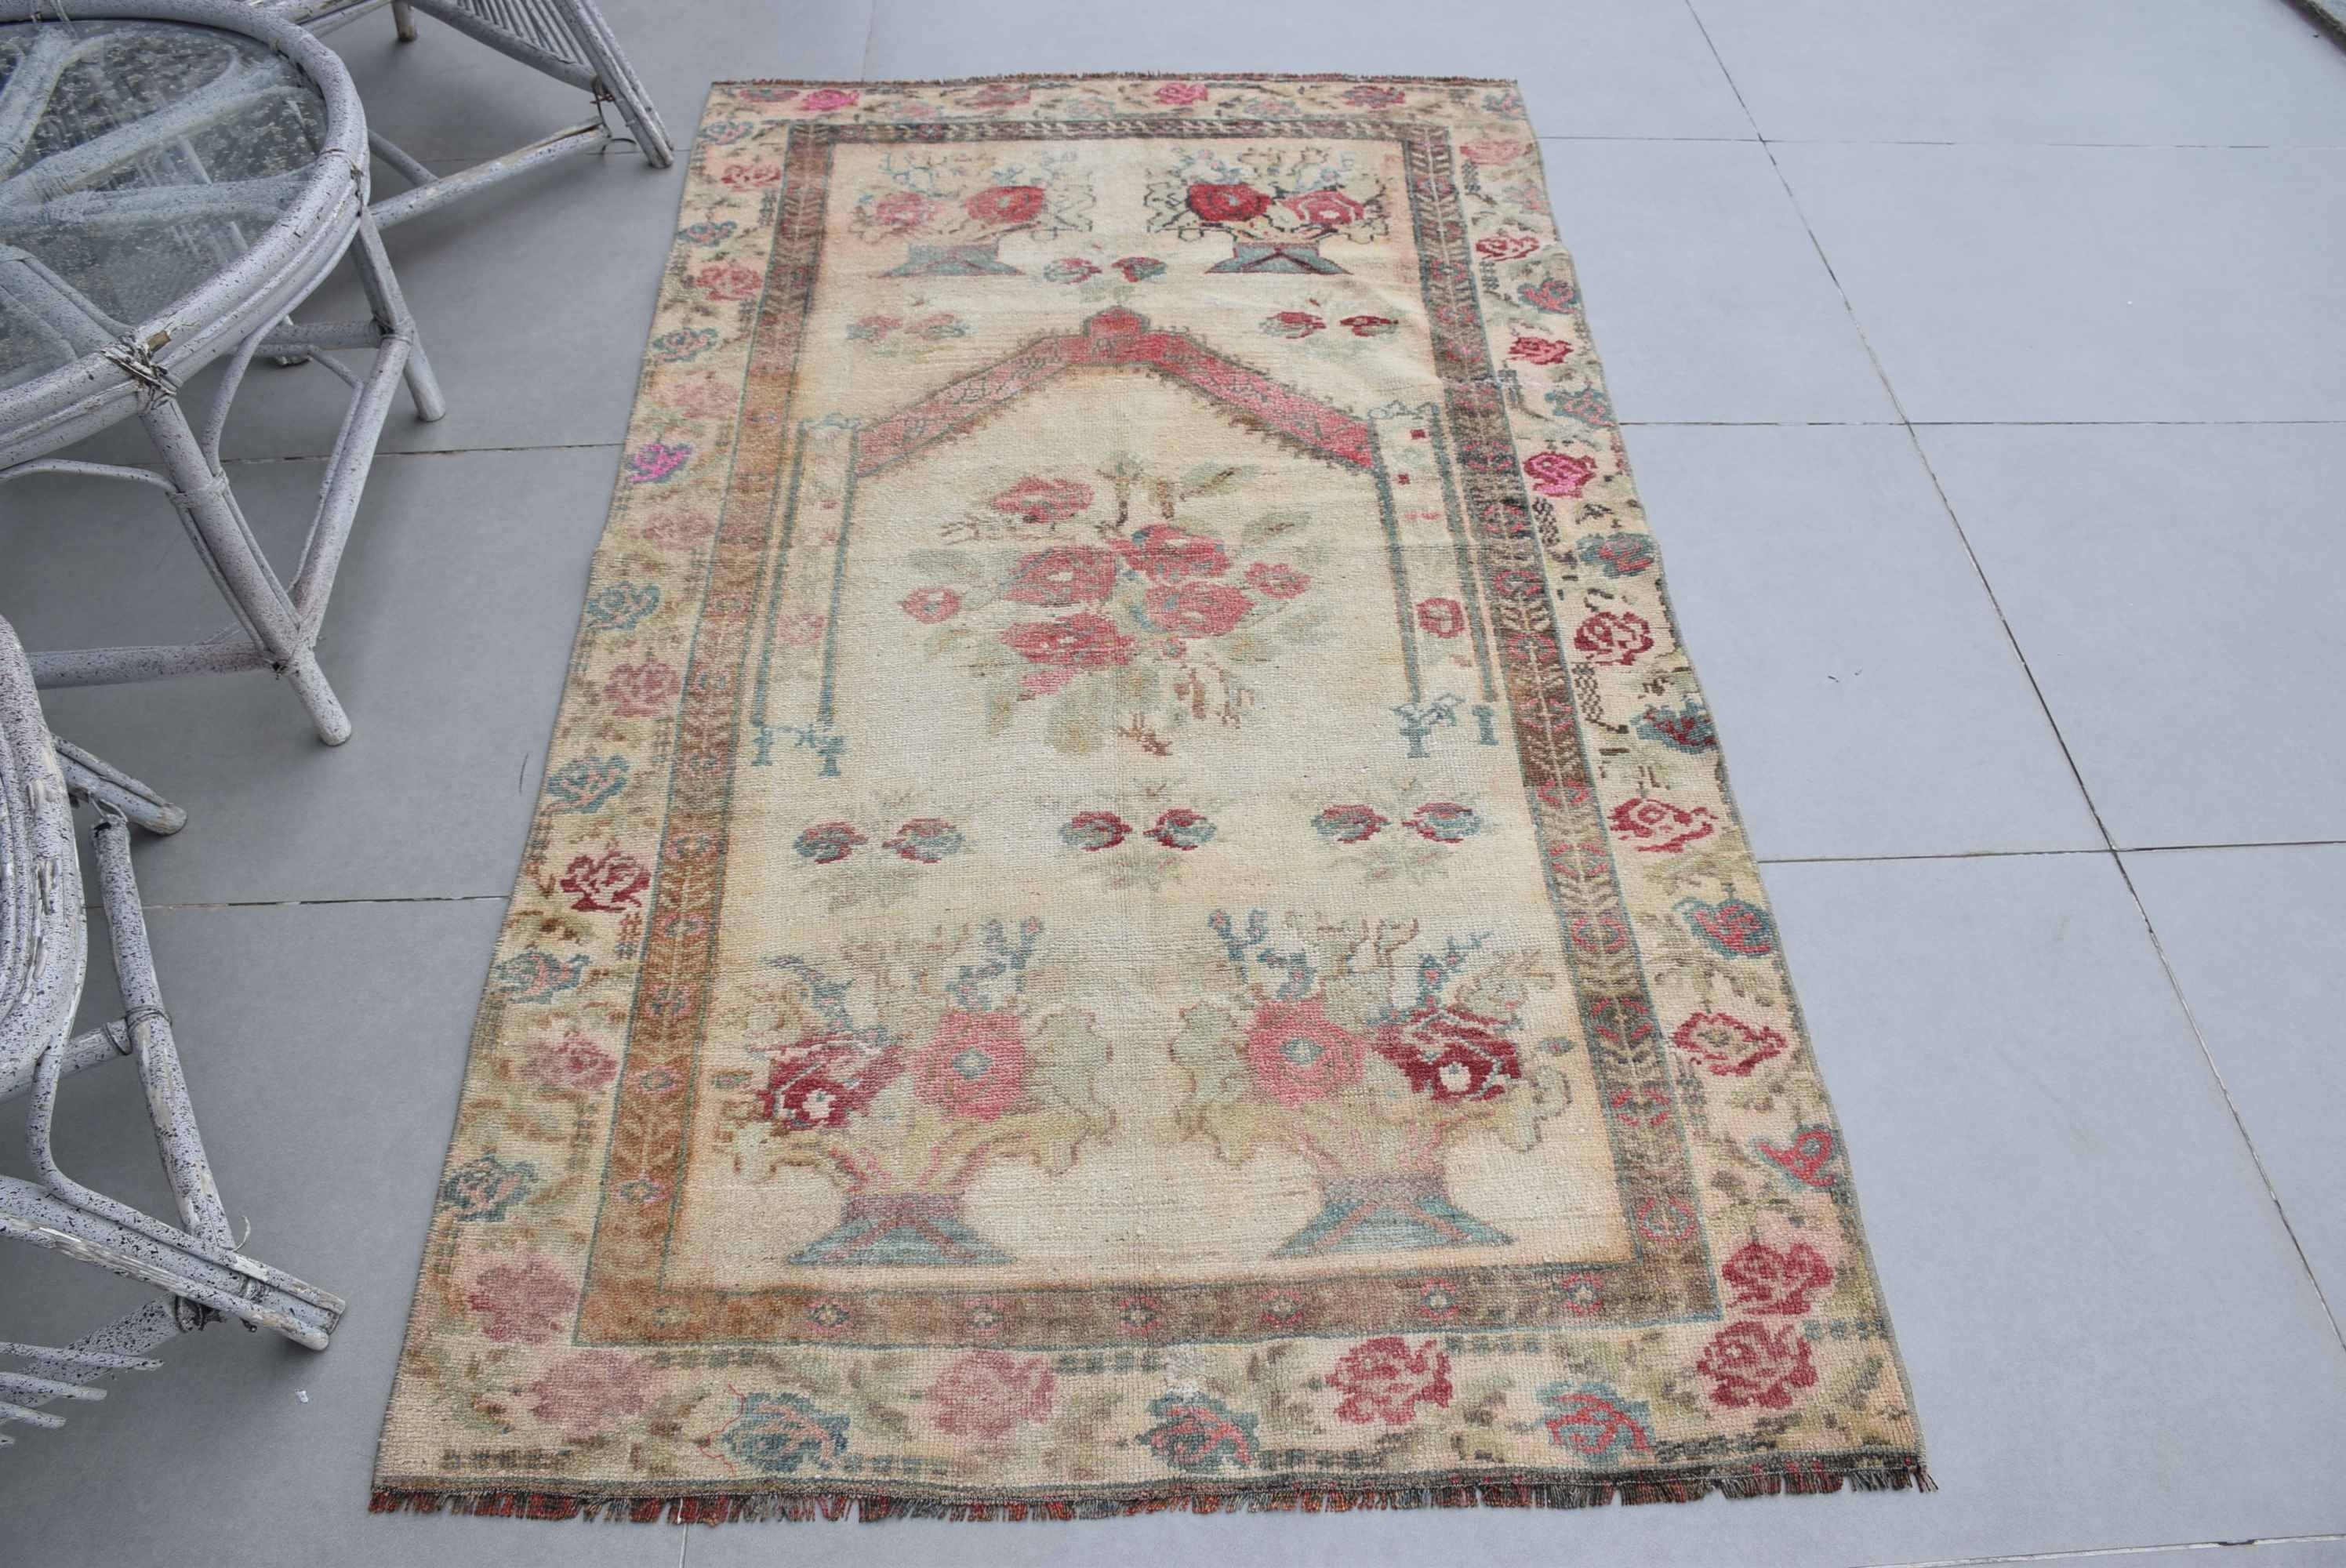 Home Decor Rug, Kitchen Rug, Rugs for Bedroom, Turkish Rugs, Entry Rugs, Beige Oriental Rug, Wool Rugs, Vintage Rug, 3.4x6.1 ft Accent Rug